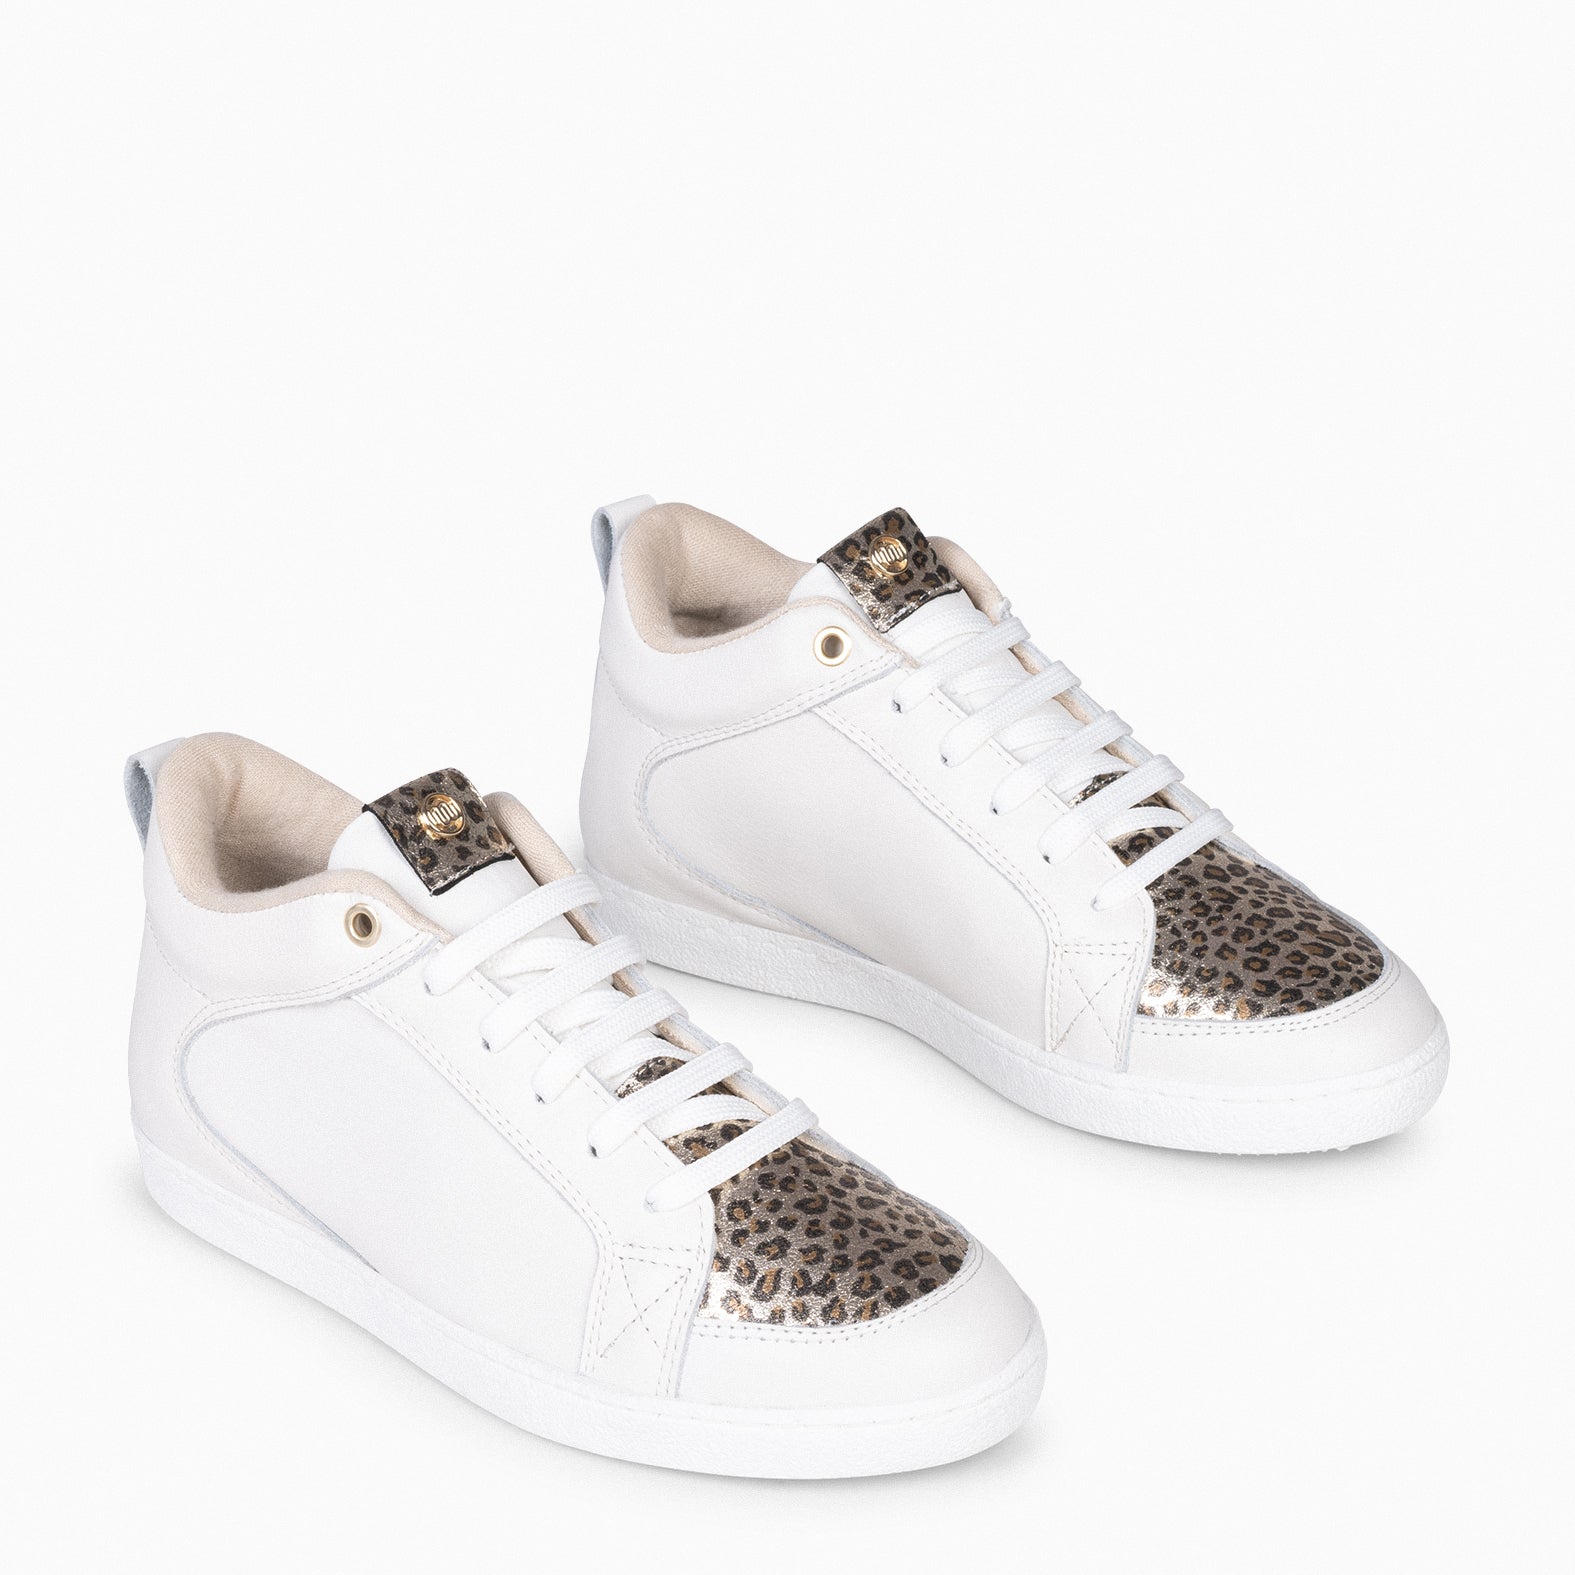 FRENCHY - WHITE LEOPARD Women wedge sneakers 